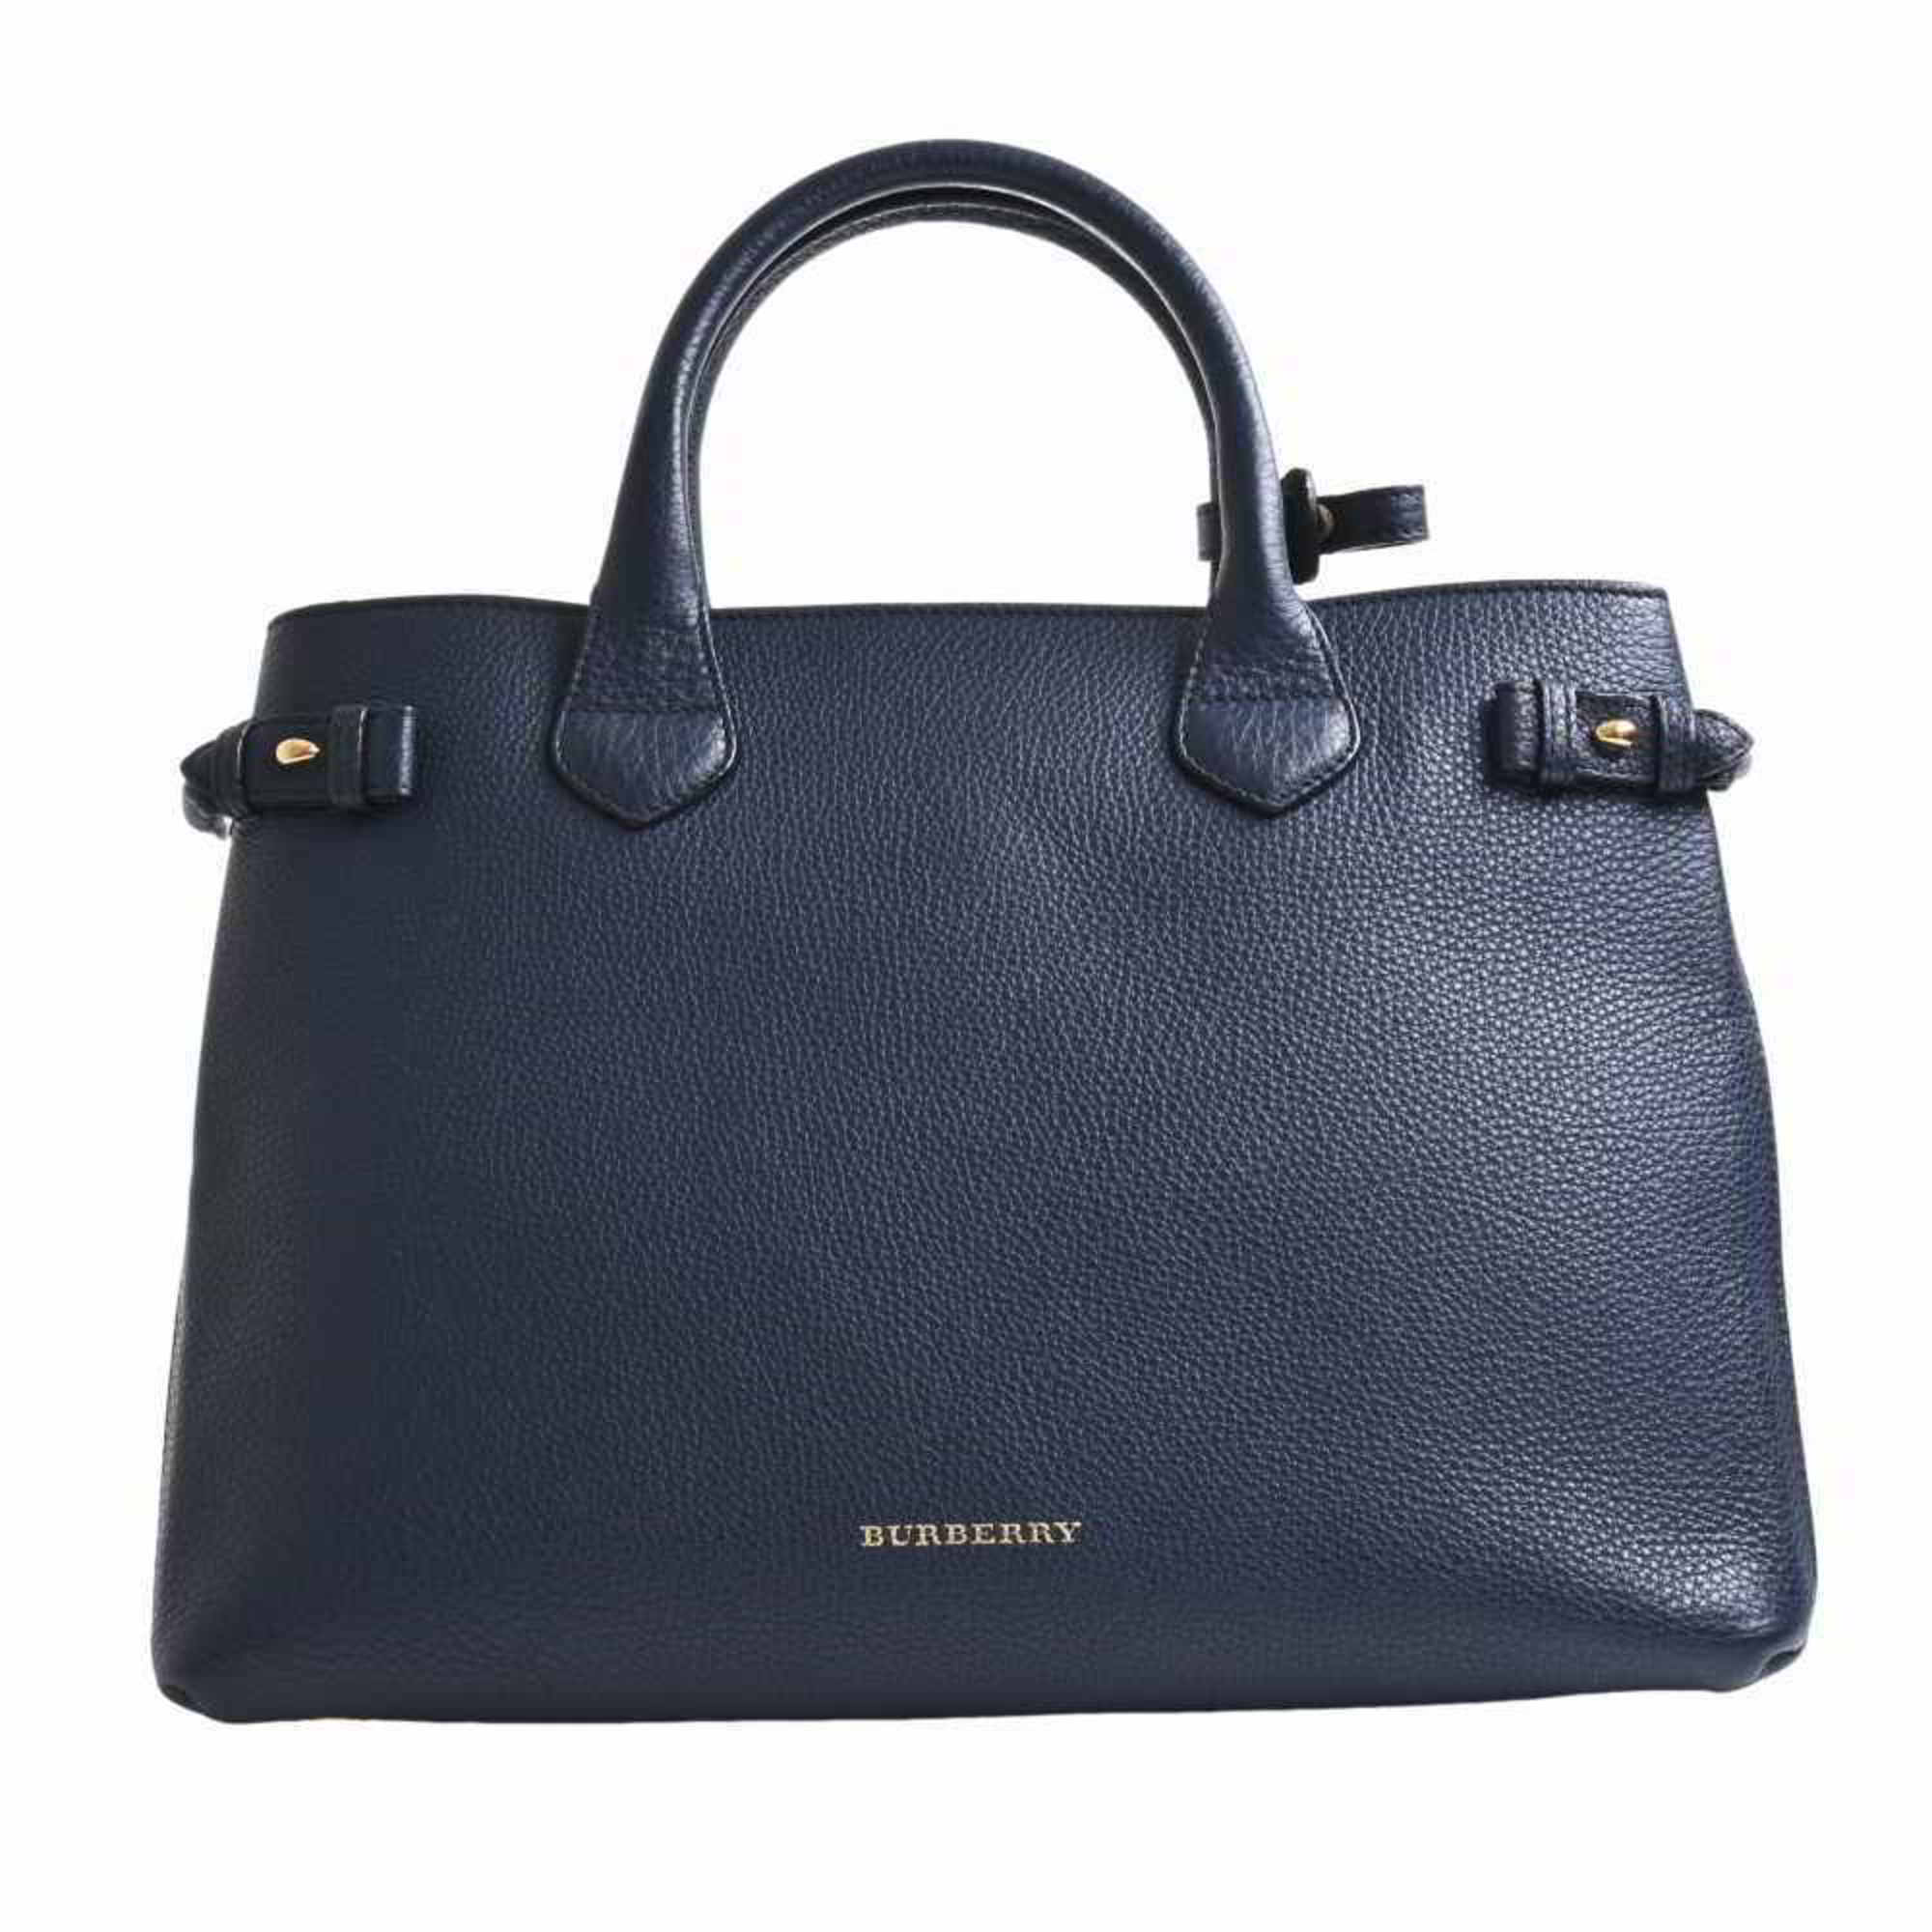 Burberry Tote Blue Bags & Handbags for Women | Authenticity Guaranteed |  eBay